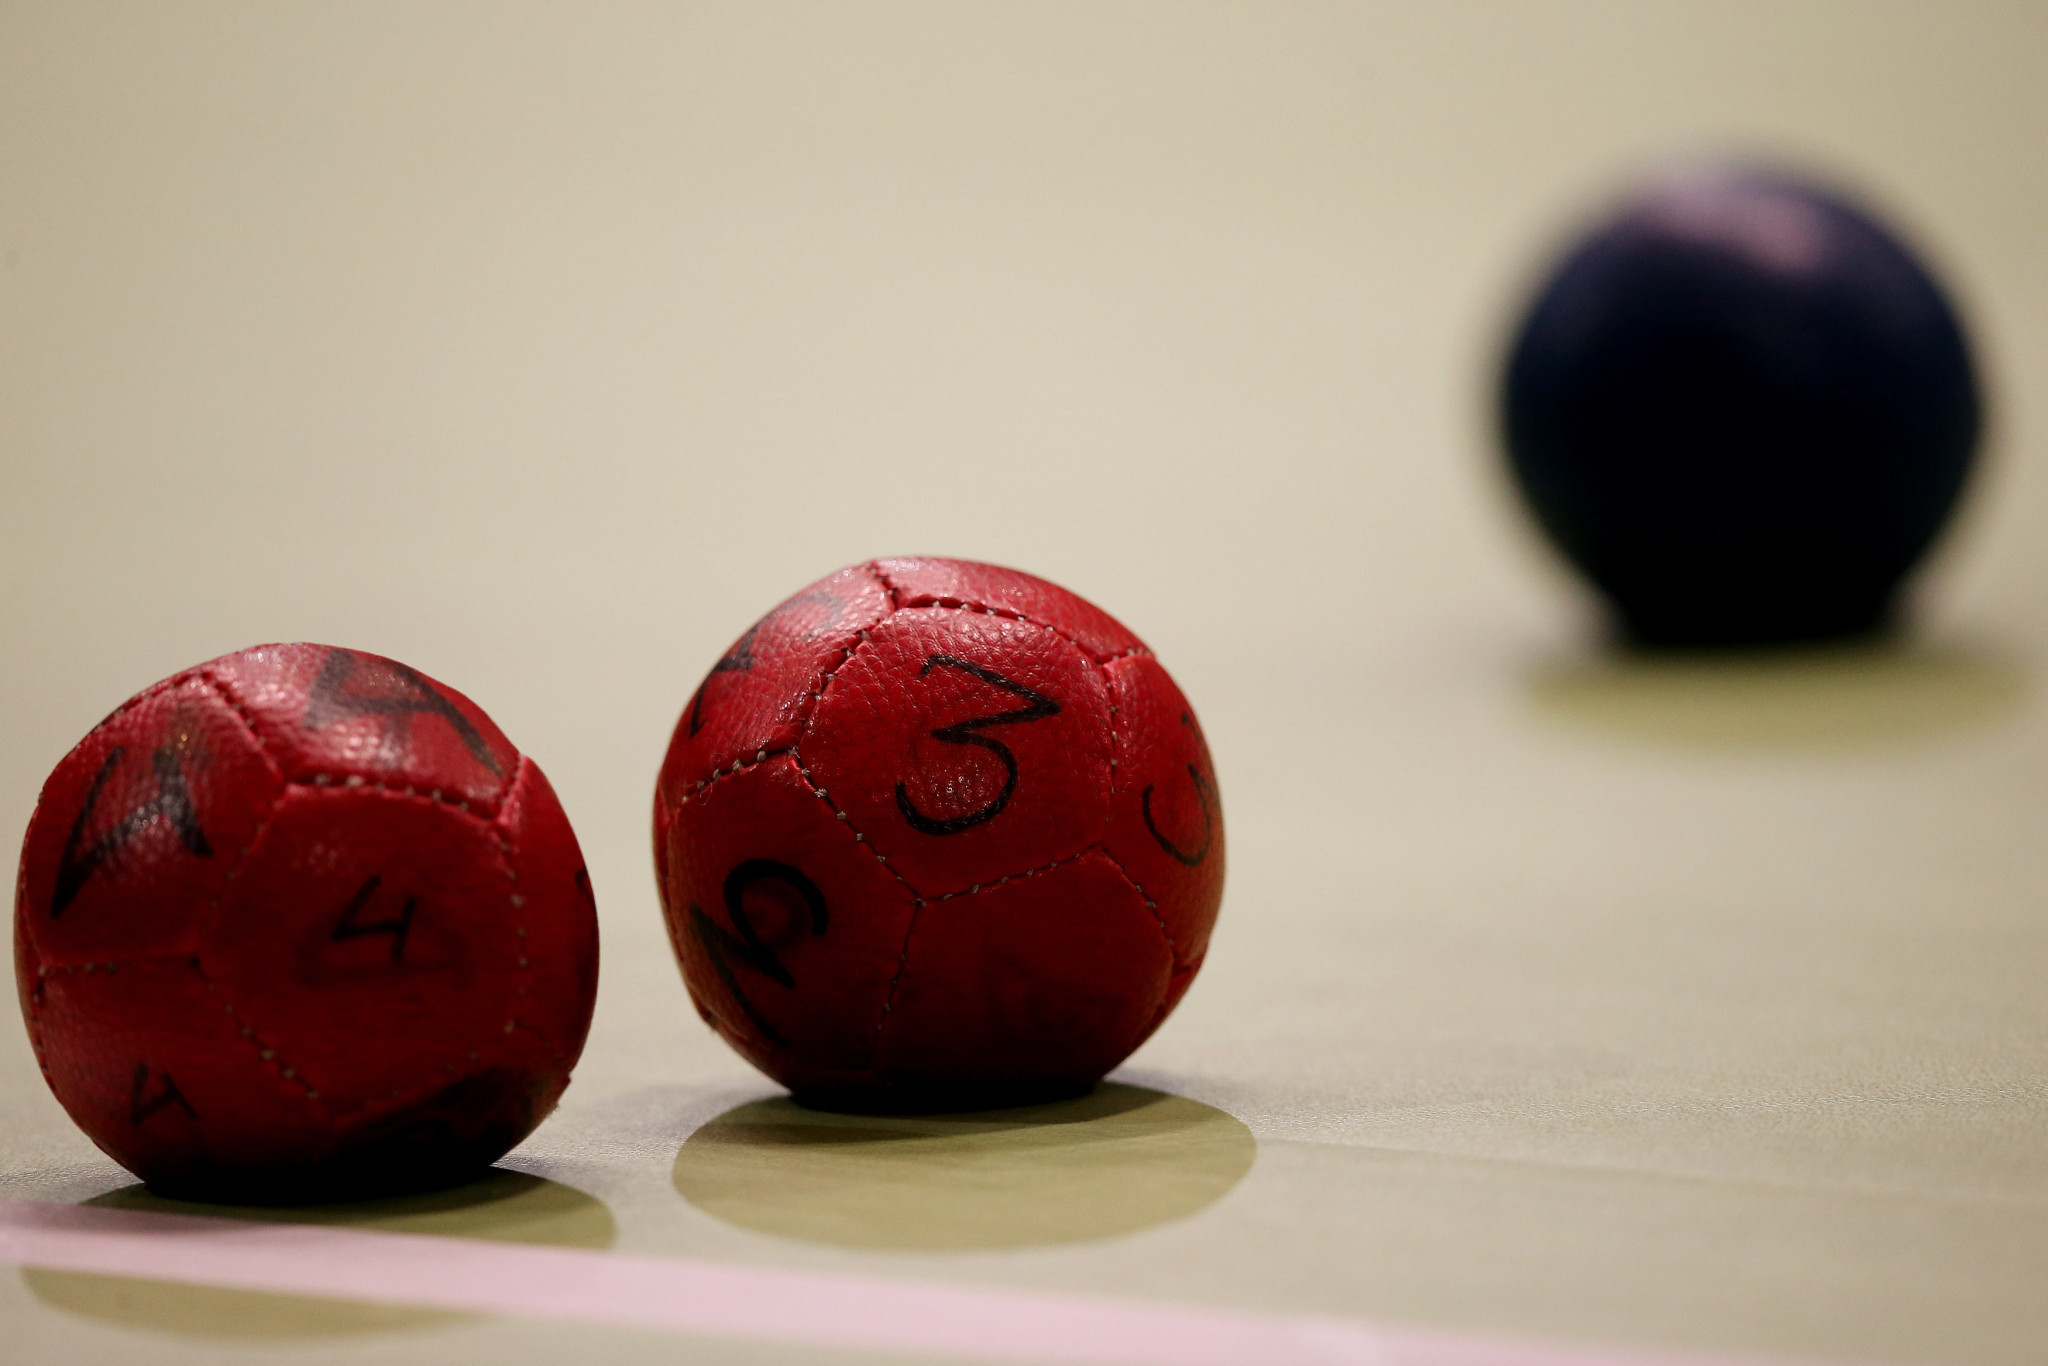 Team competition starts at European Boccia Championship in Seville